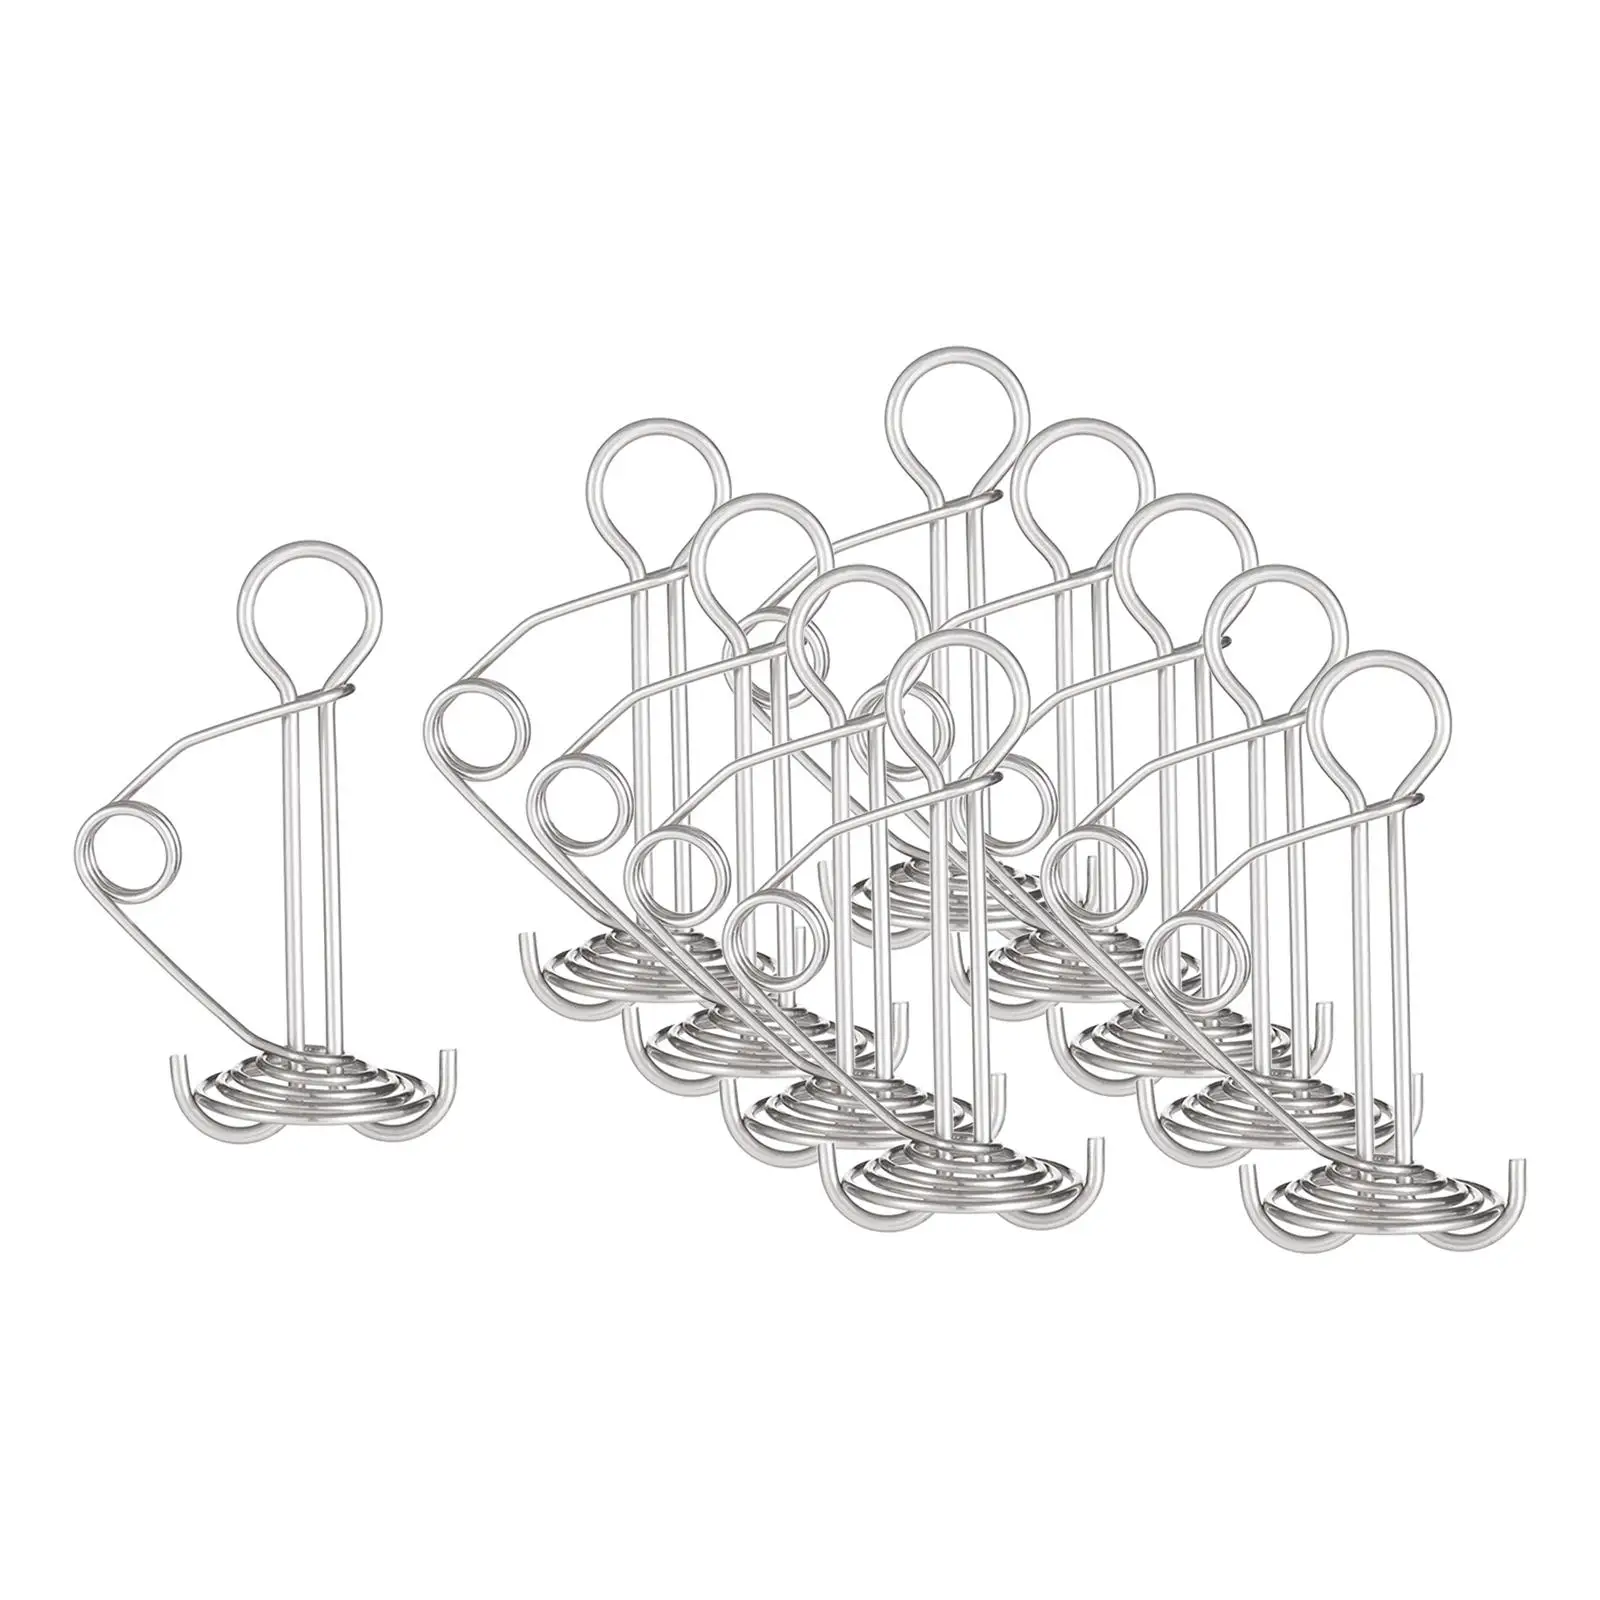 10 Pack Deck Anchor Peg Rope Buckle Spring Buckle Awning Tree Picks